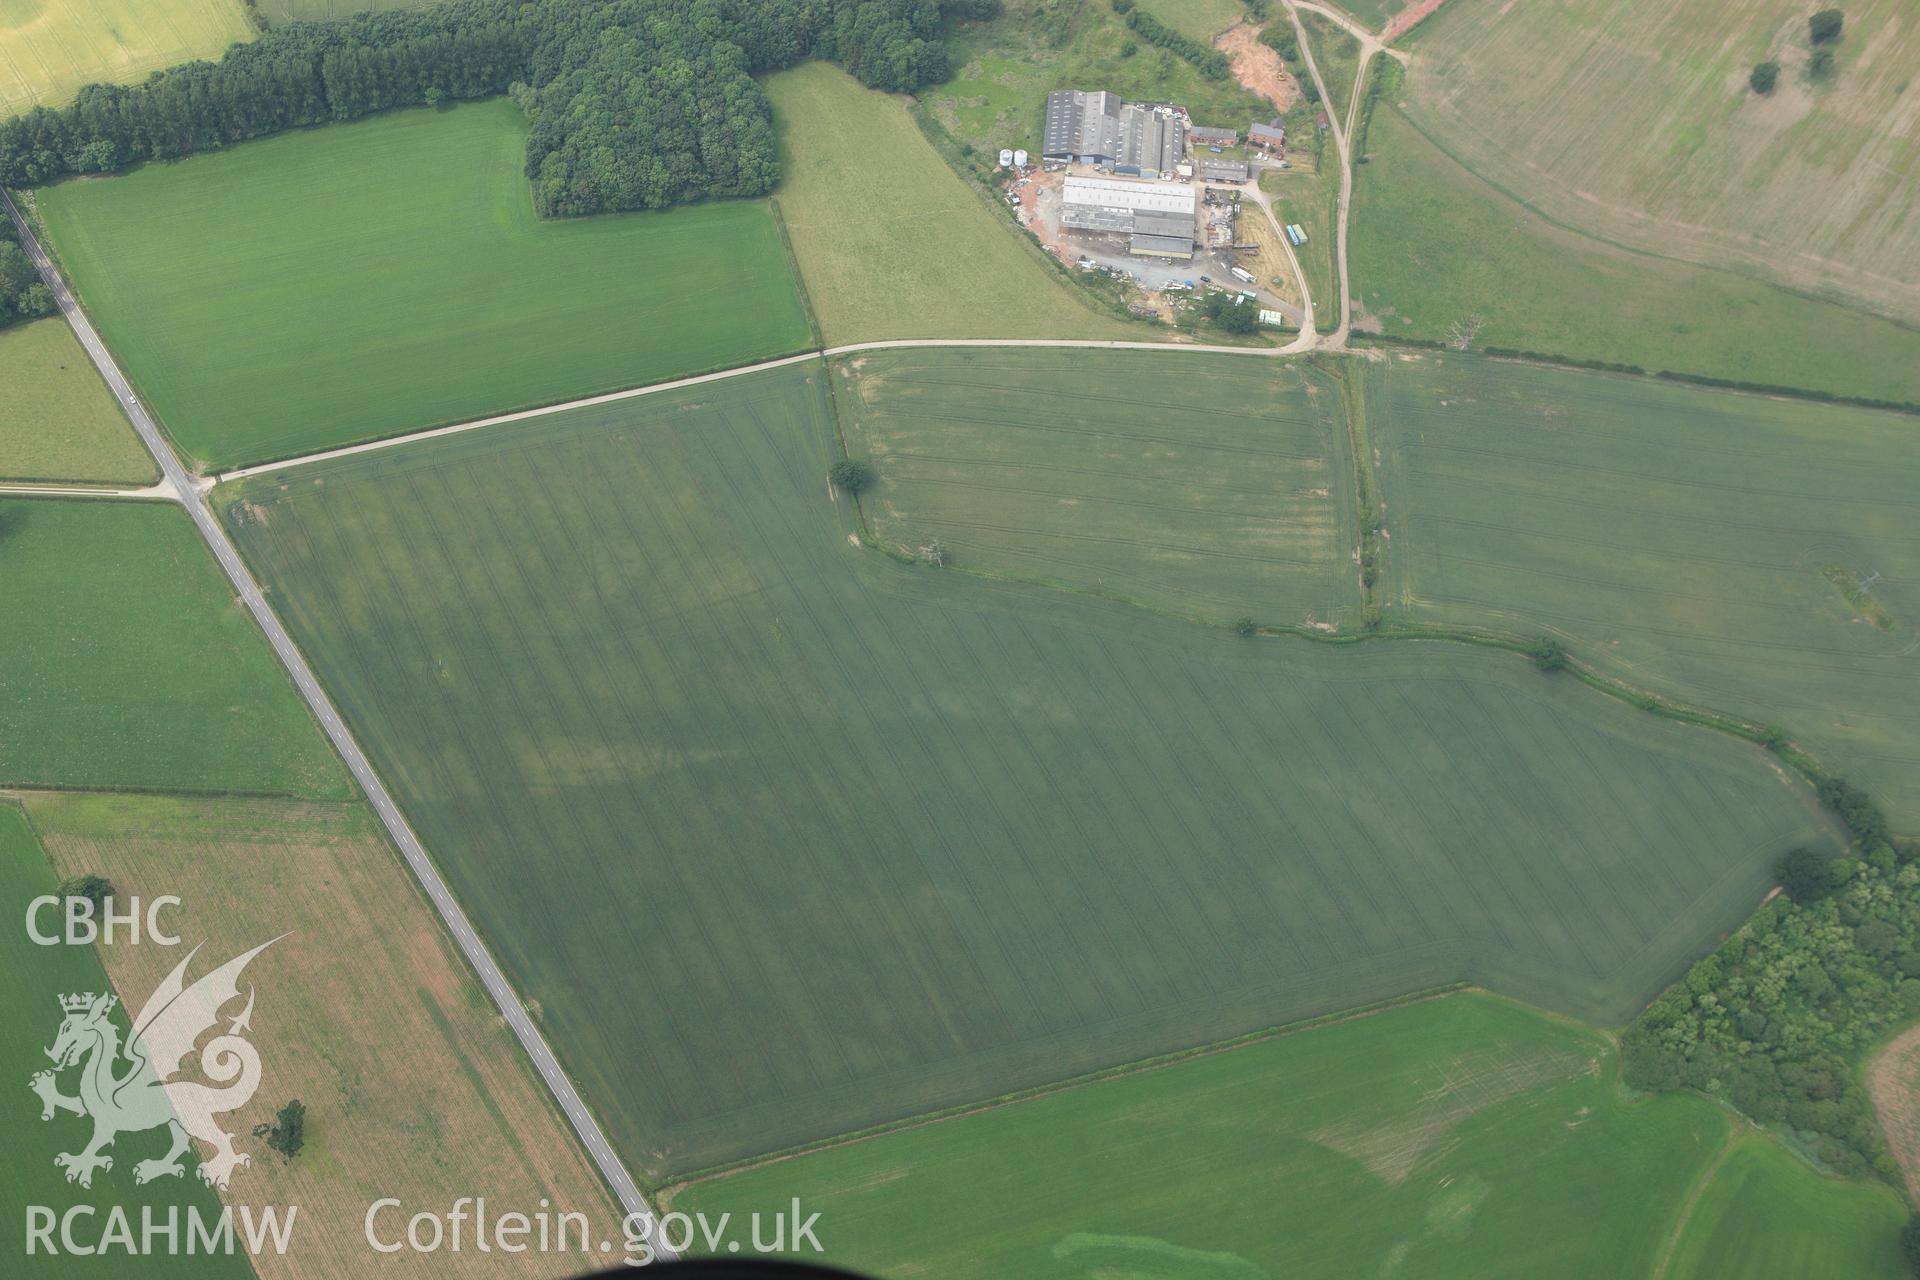 RCAHMW colour oblique aerial photograph of Gerwyn-Fechan Cropmarks showing a ring ditch. Taken on 29 June 2009 by Toby Driver